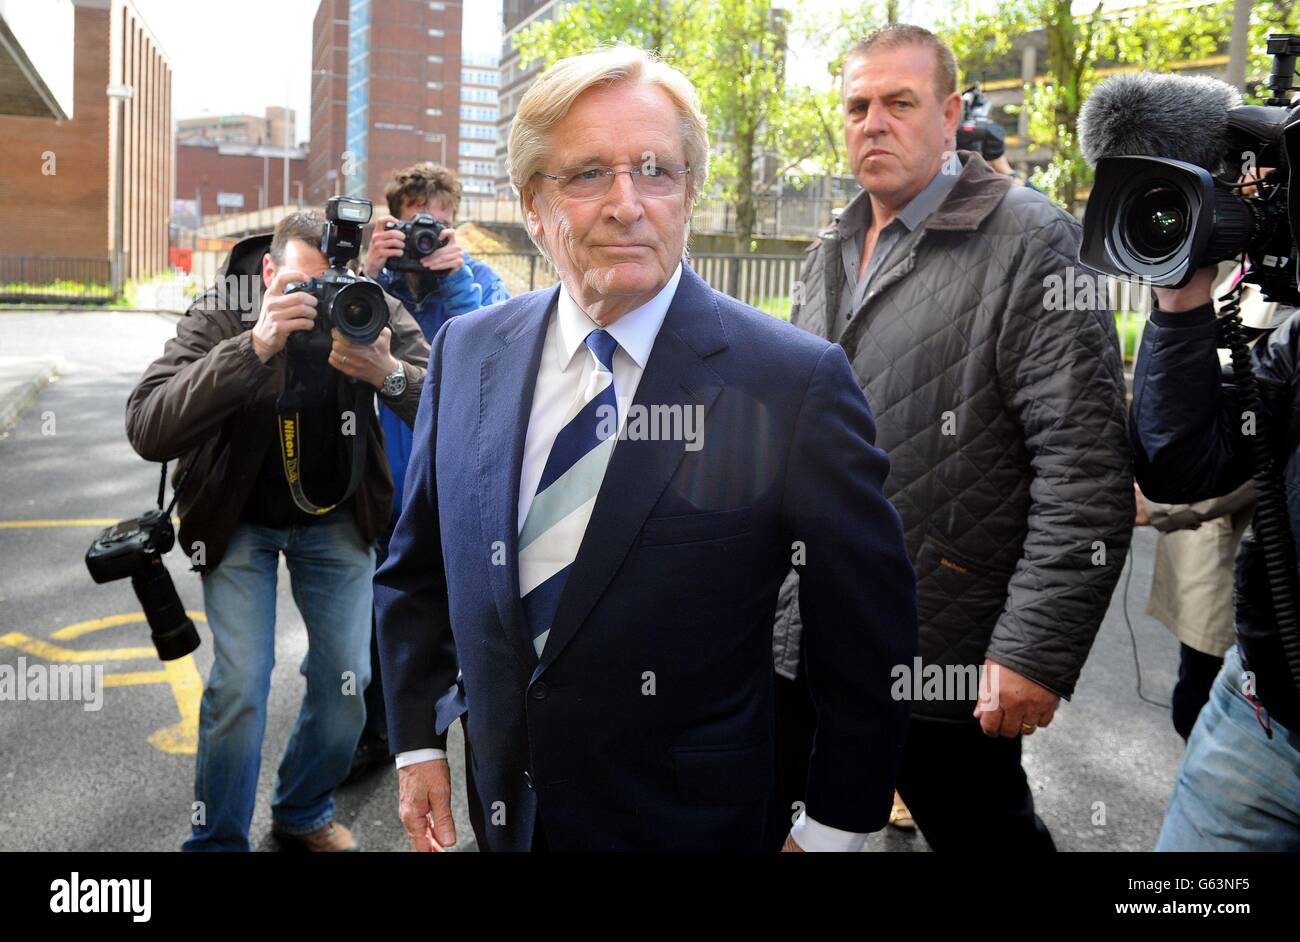 Coronation Street actor Bill Roache arrives at Preston Magistrates' Court where he is accused of raping a 15-year-old girl. Stock Photo